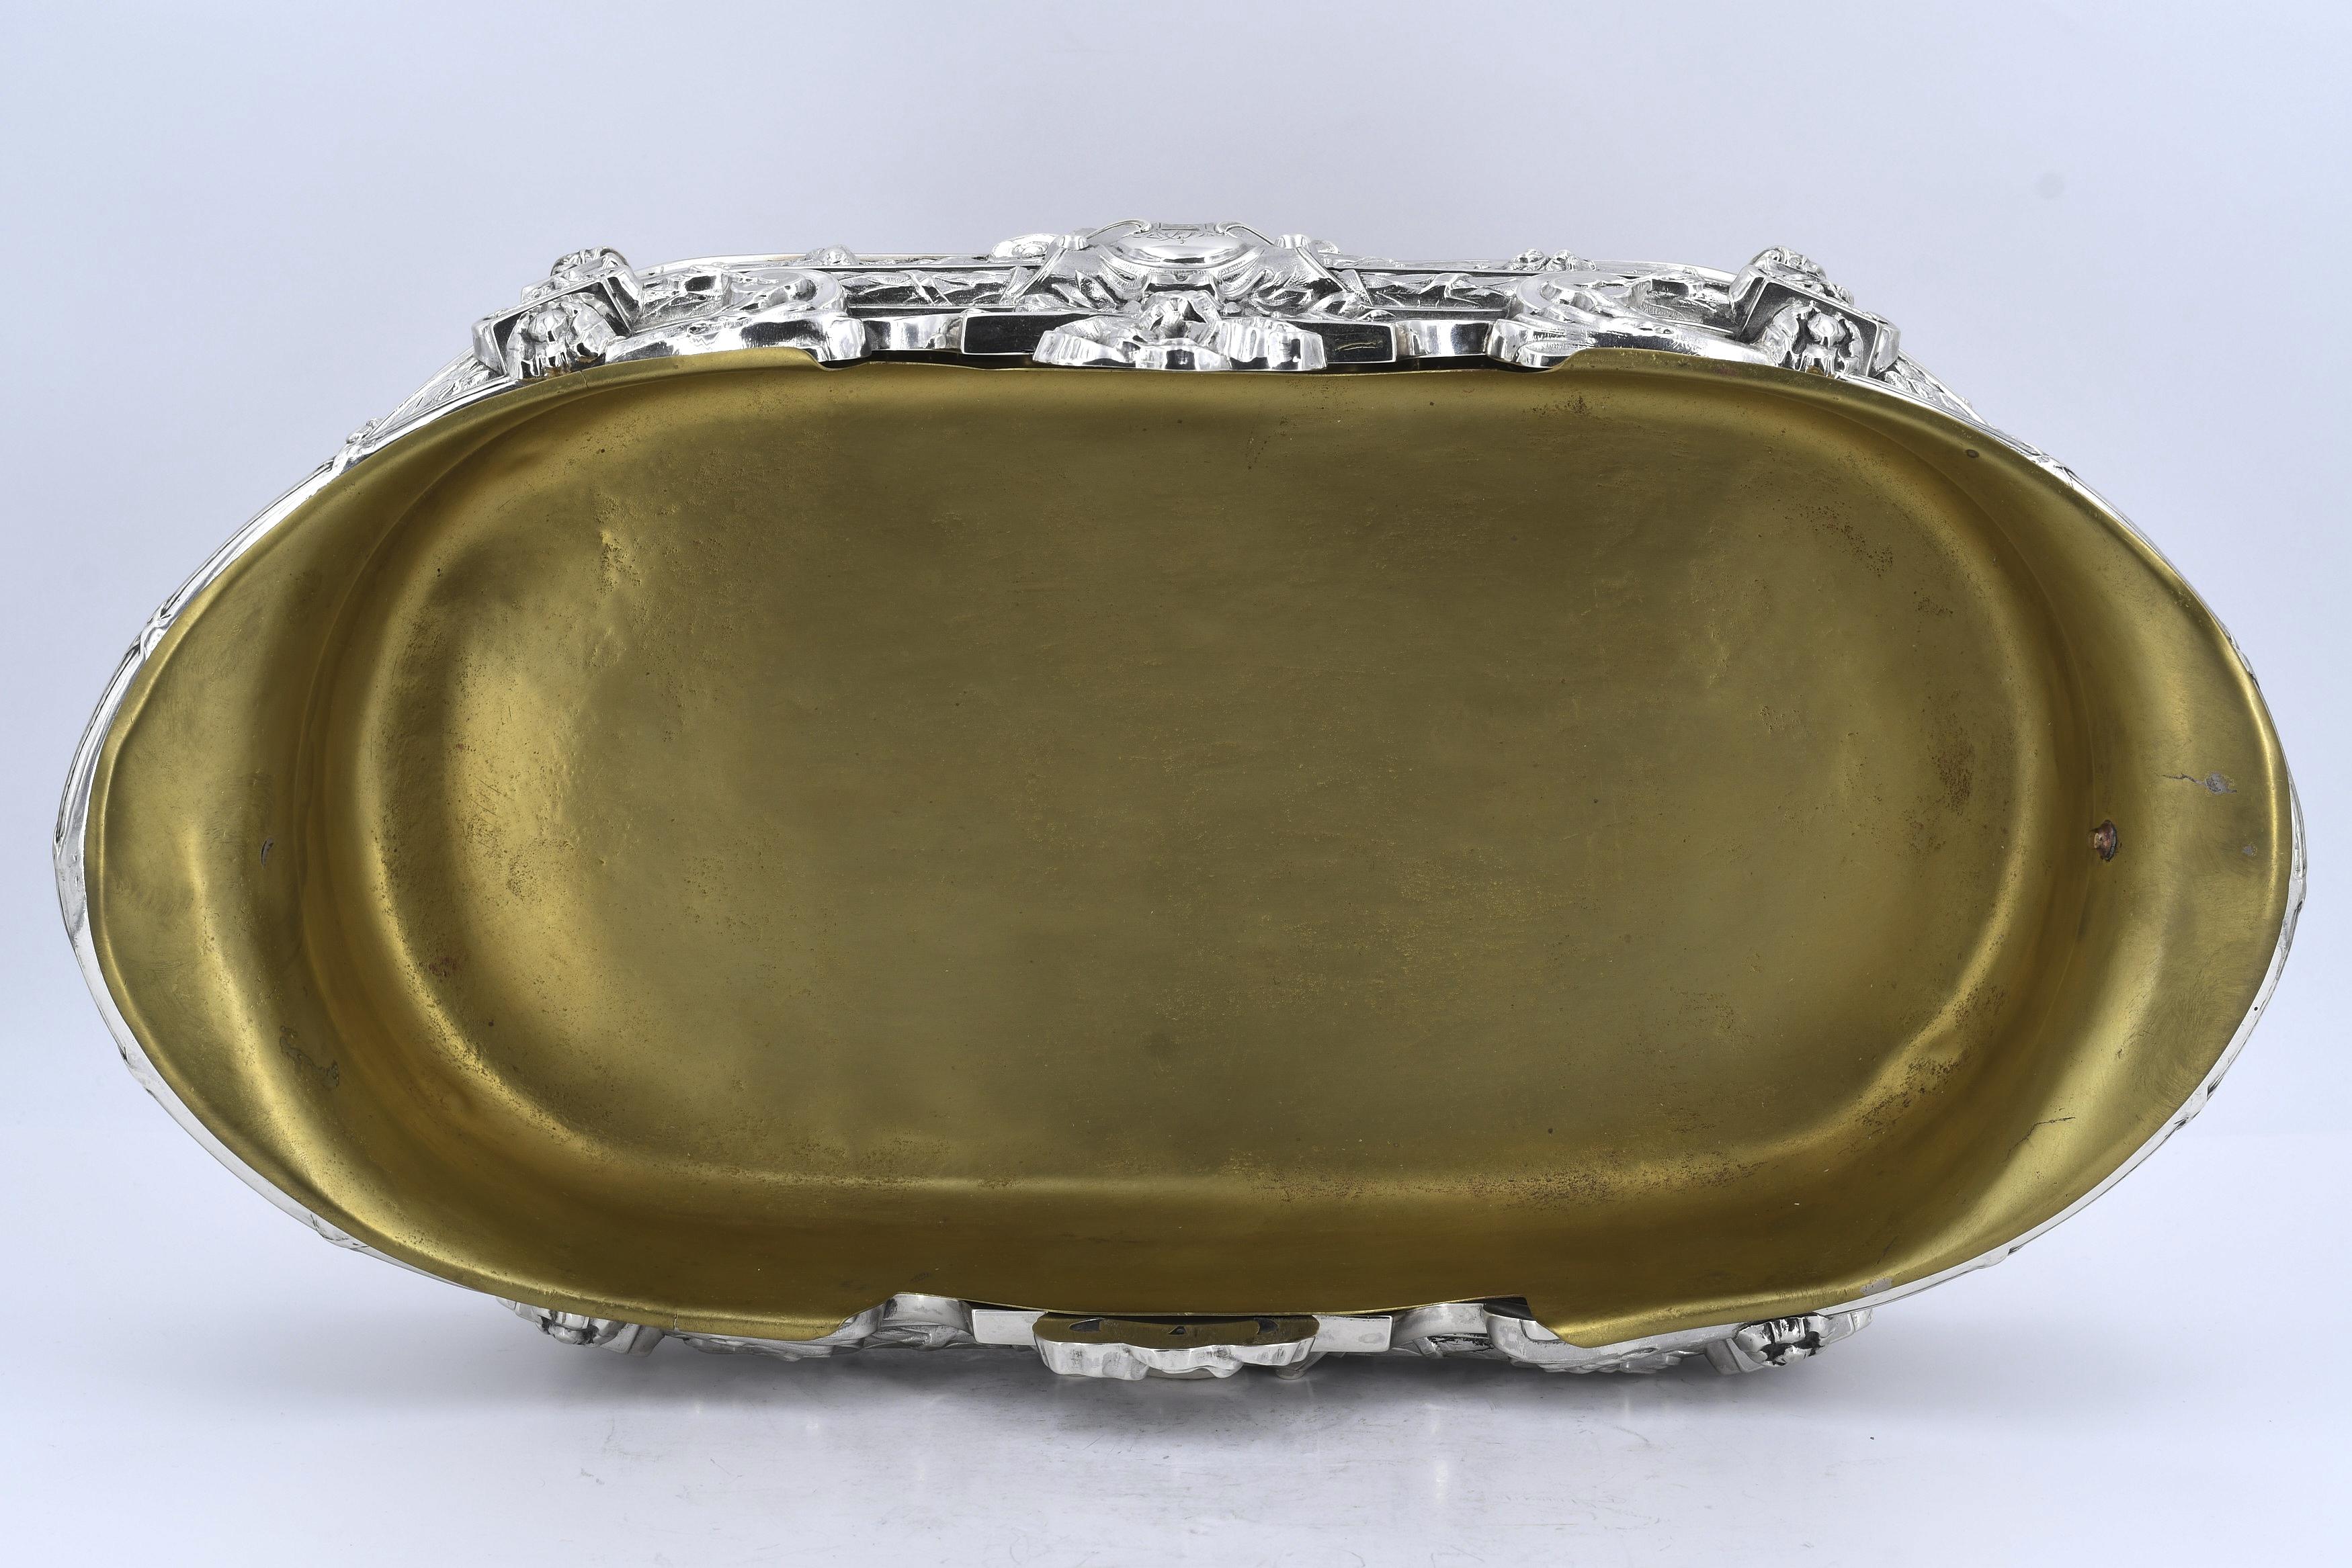 Oval silver jardinière with musical motifs and festoons - Image 6 of 8